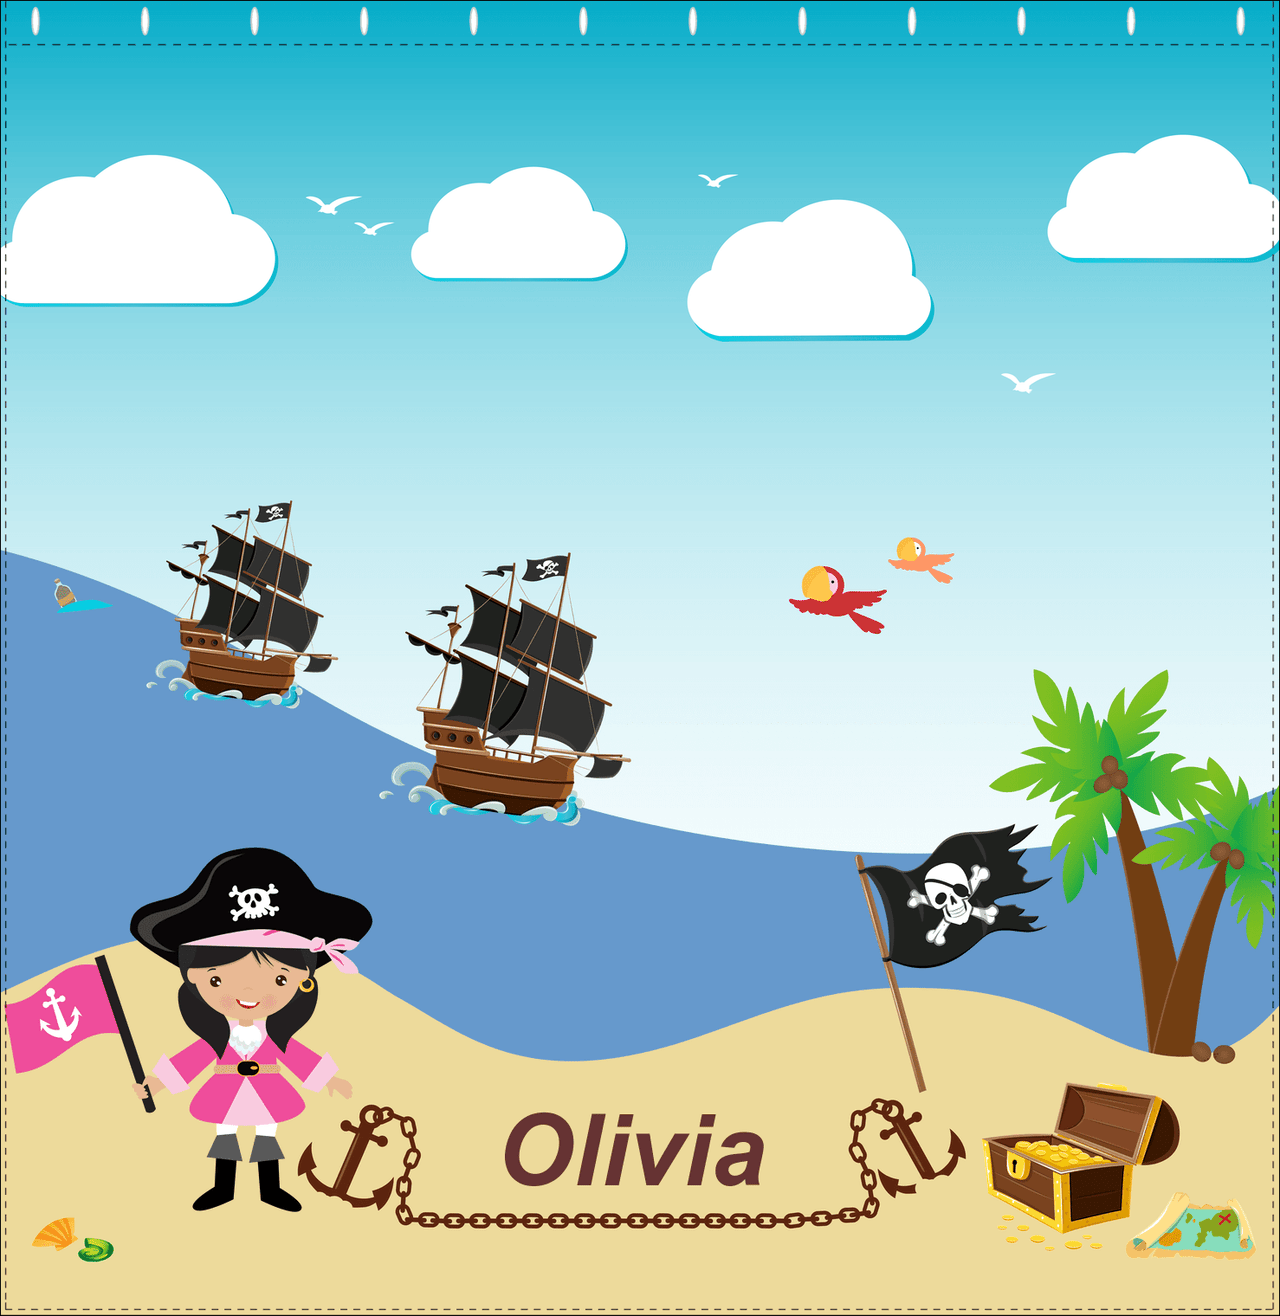 Personalized Pirate Shower Curtain V - Blue Background - Black Hair Girl with Flag - Decorate View